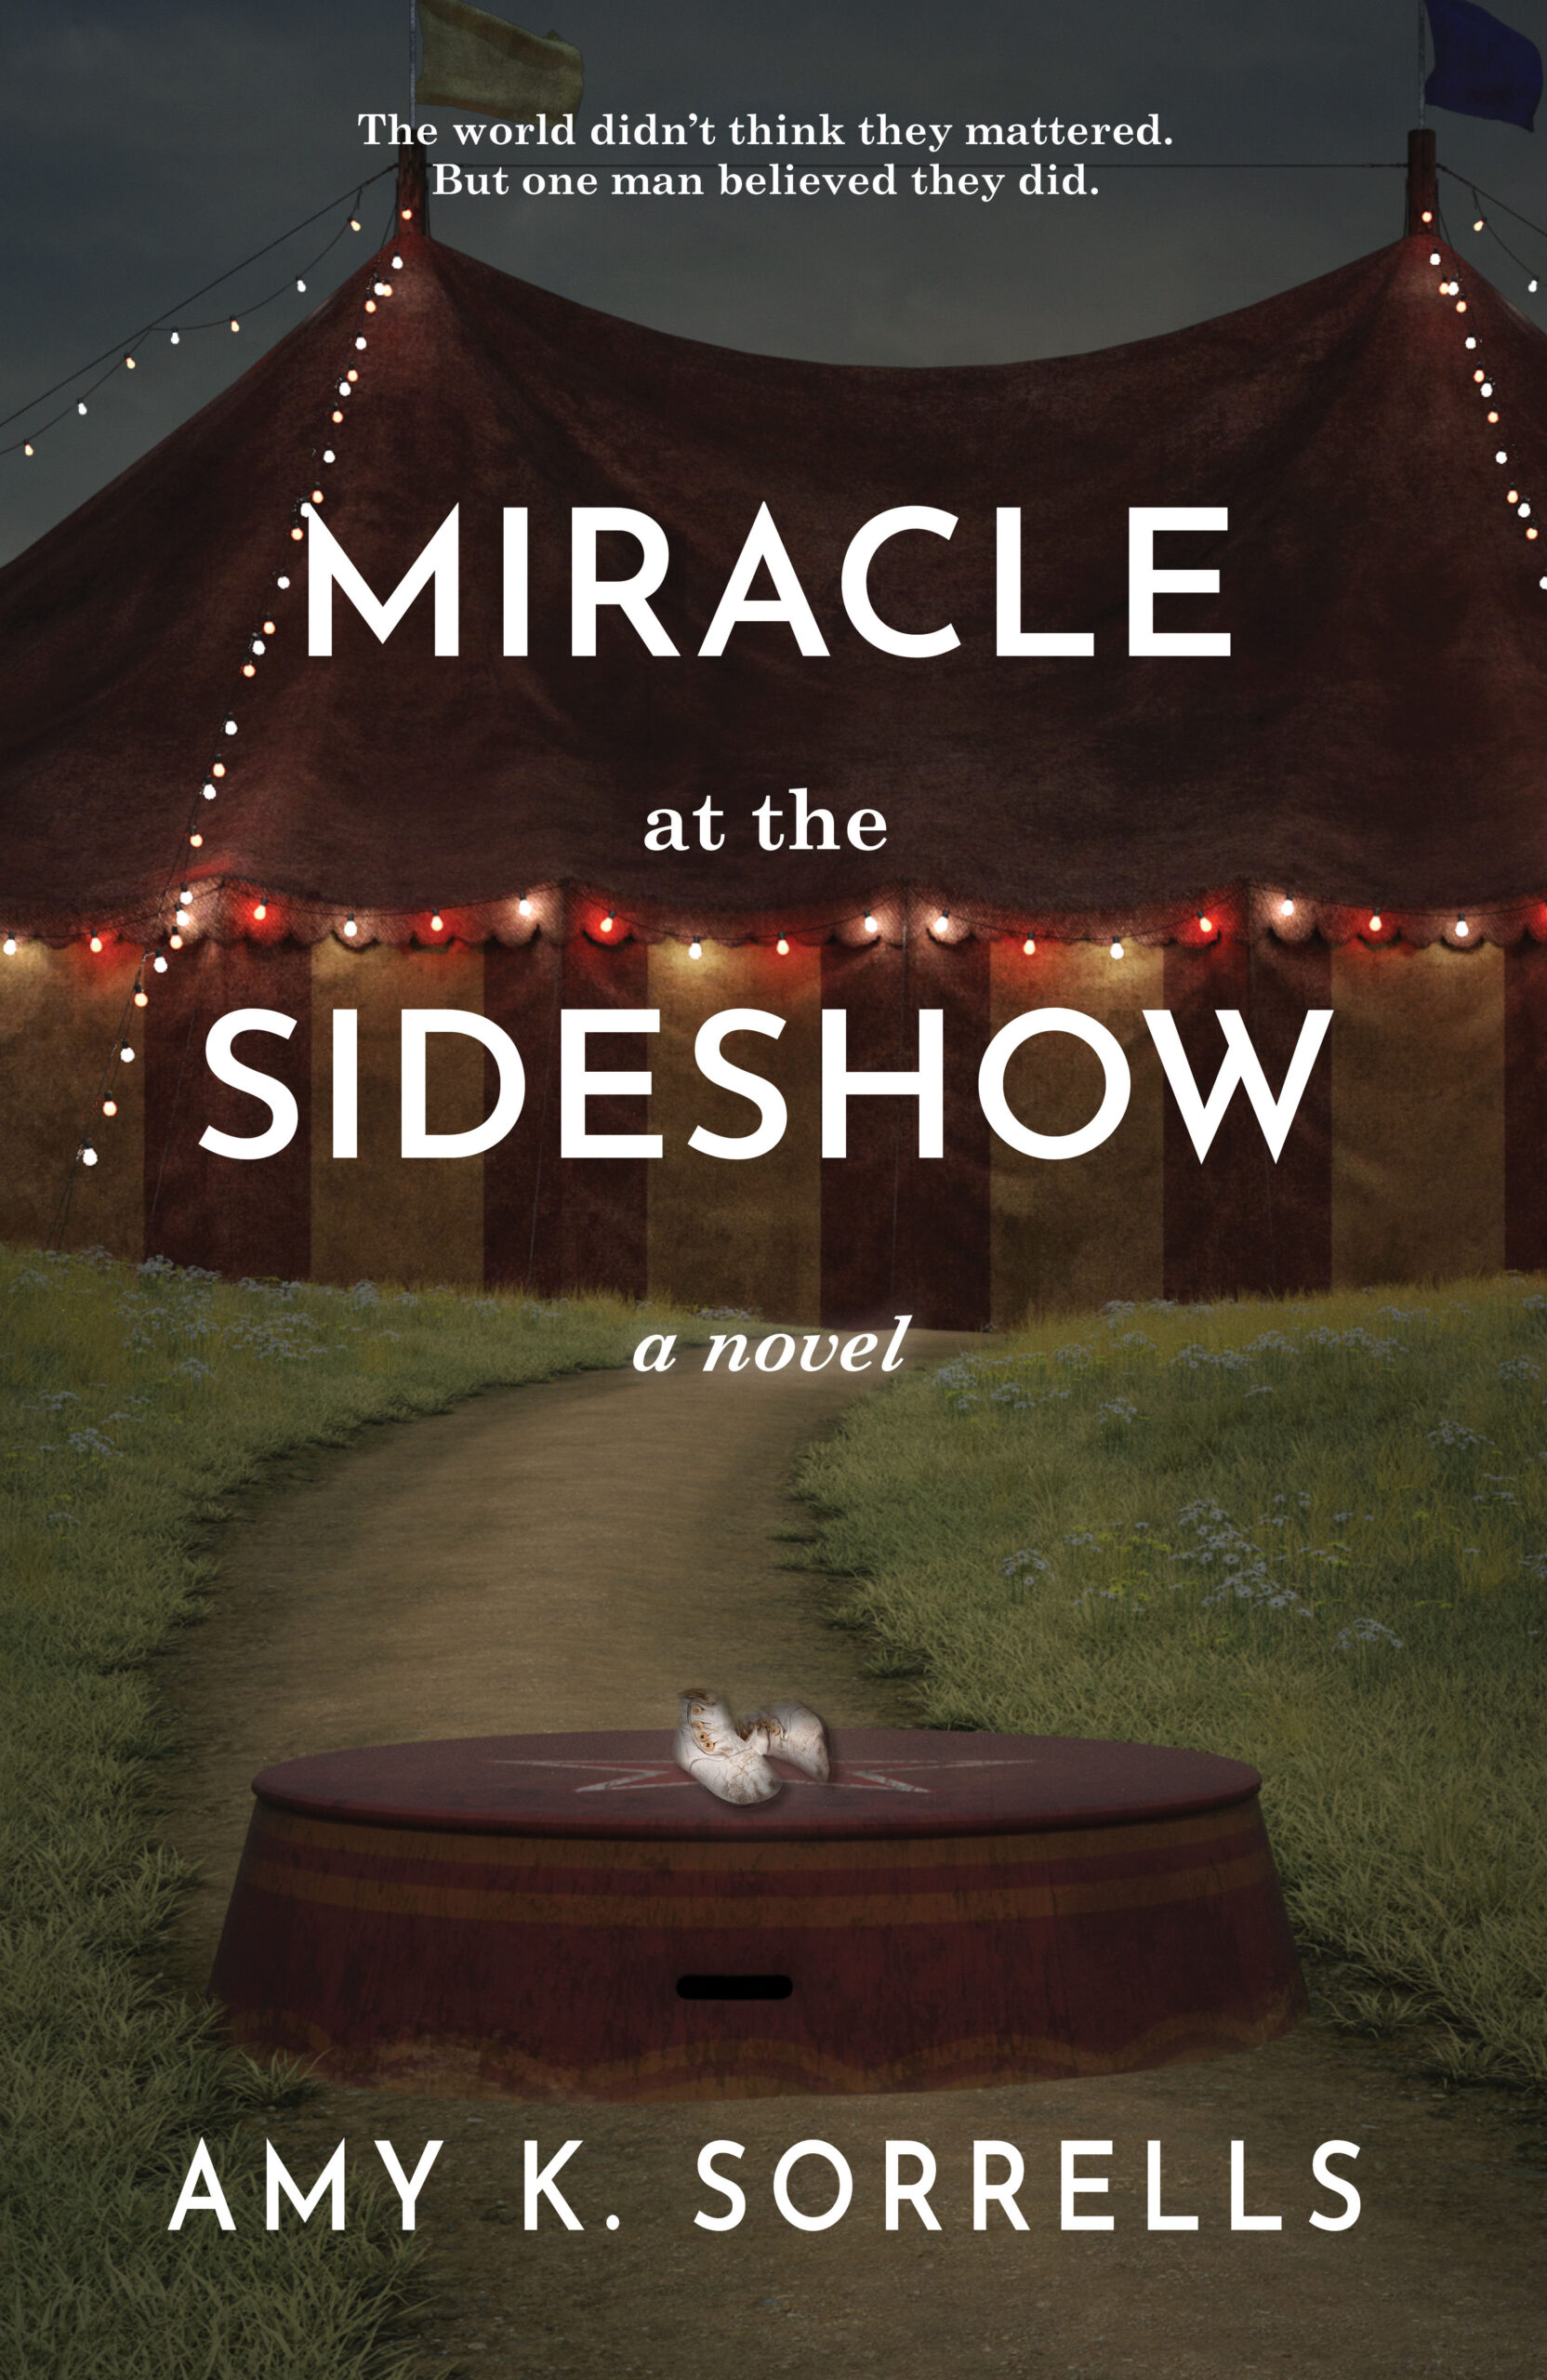 Miracle at the Sideshow